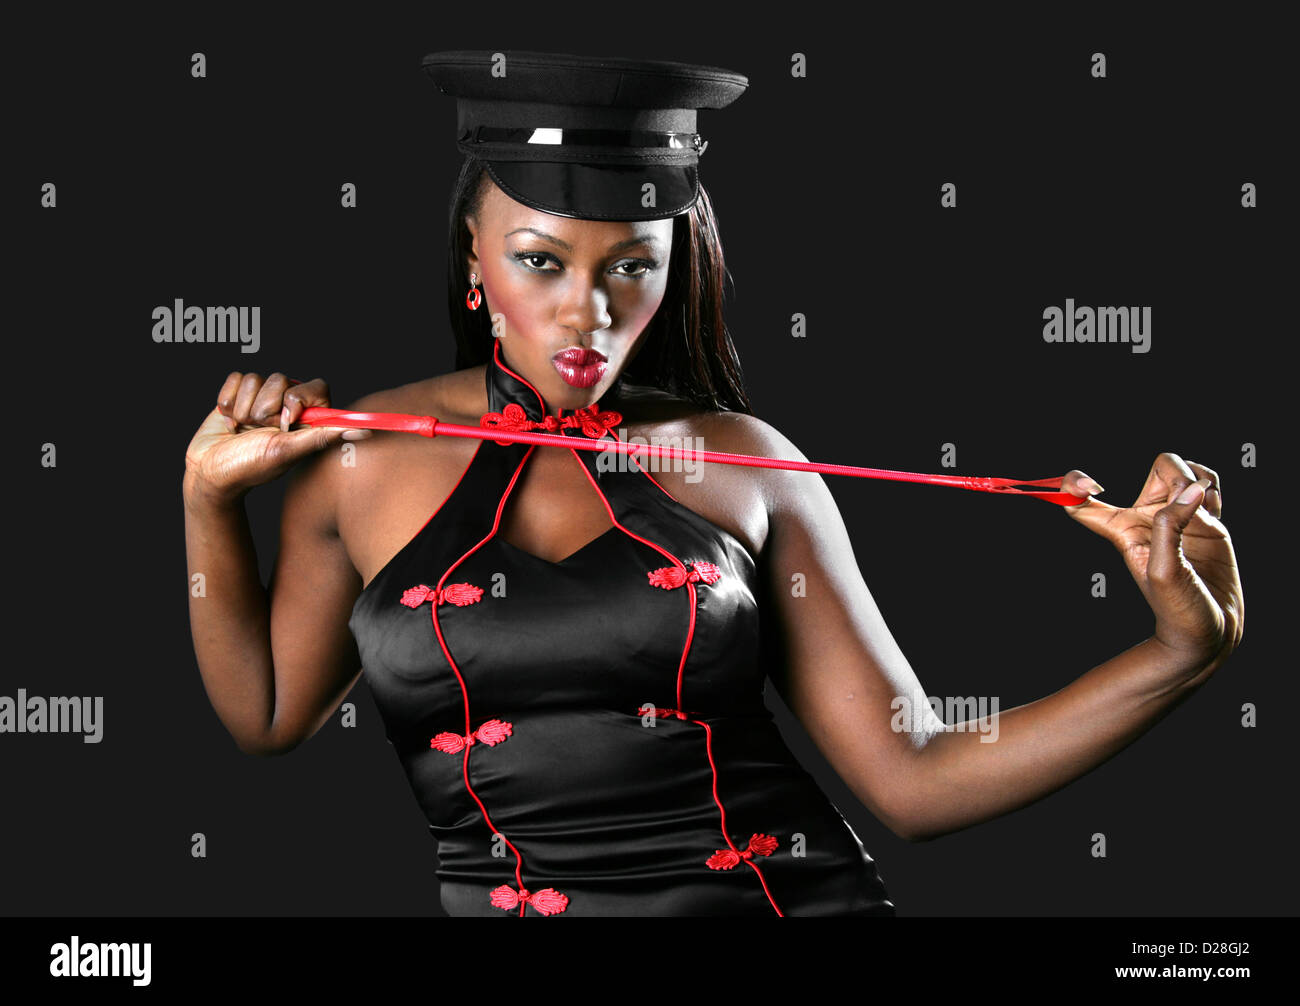 Black African Woman Wearing a Black and Red Chinese Dress, Black Cap and Wielding a Red Riding Crop. Stock Photo